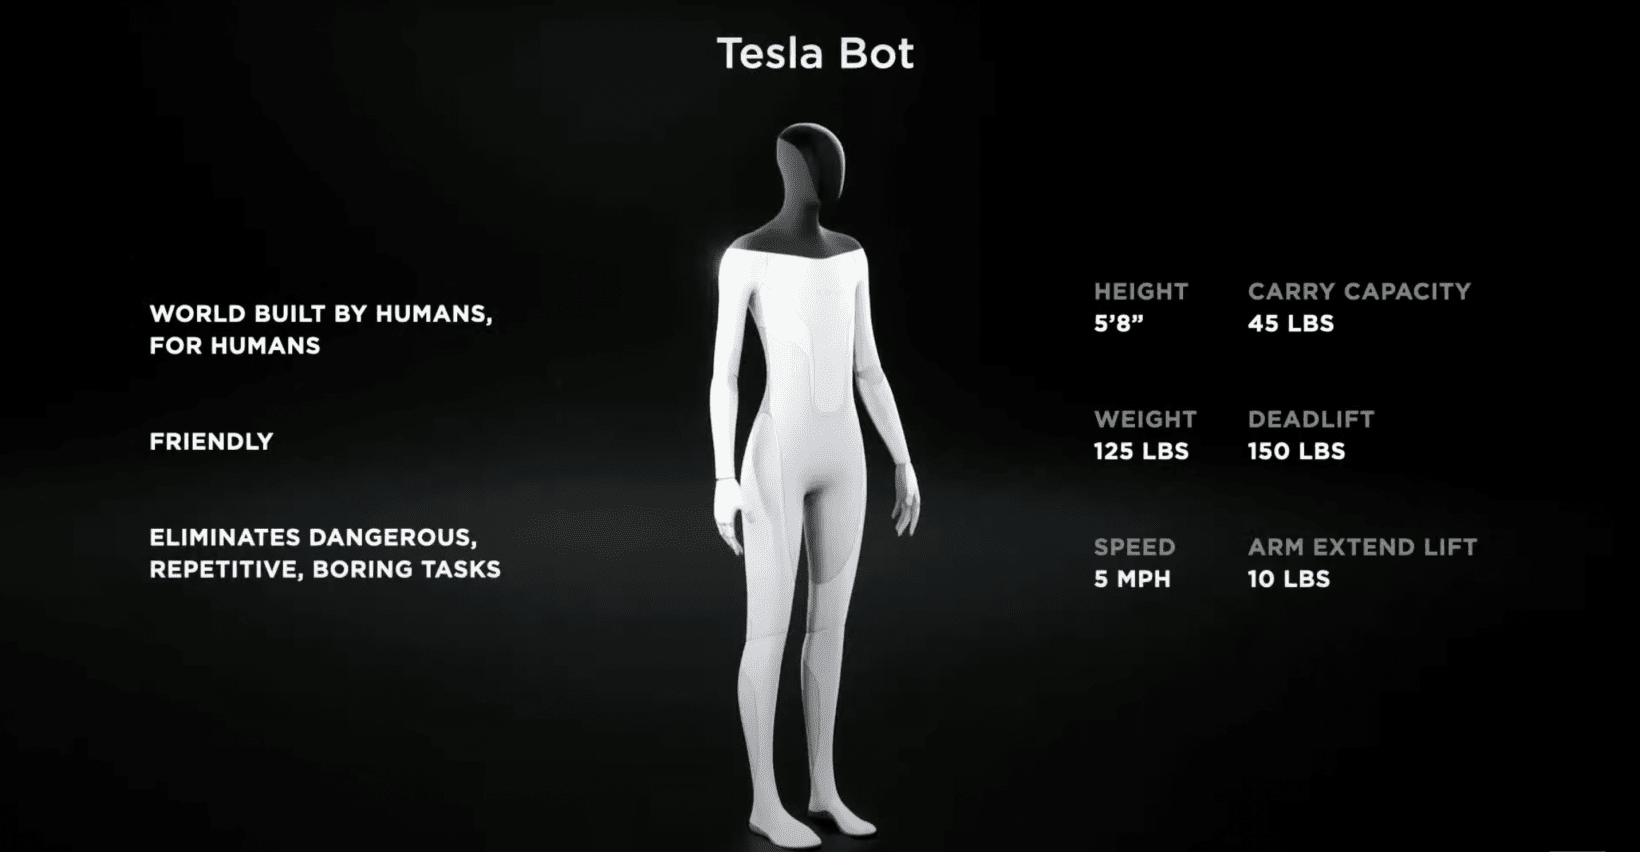 Basic specifications of a Tesla bot